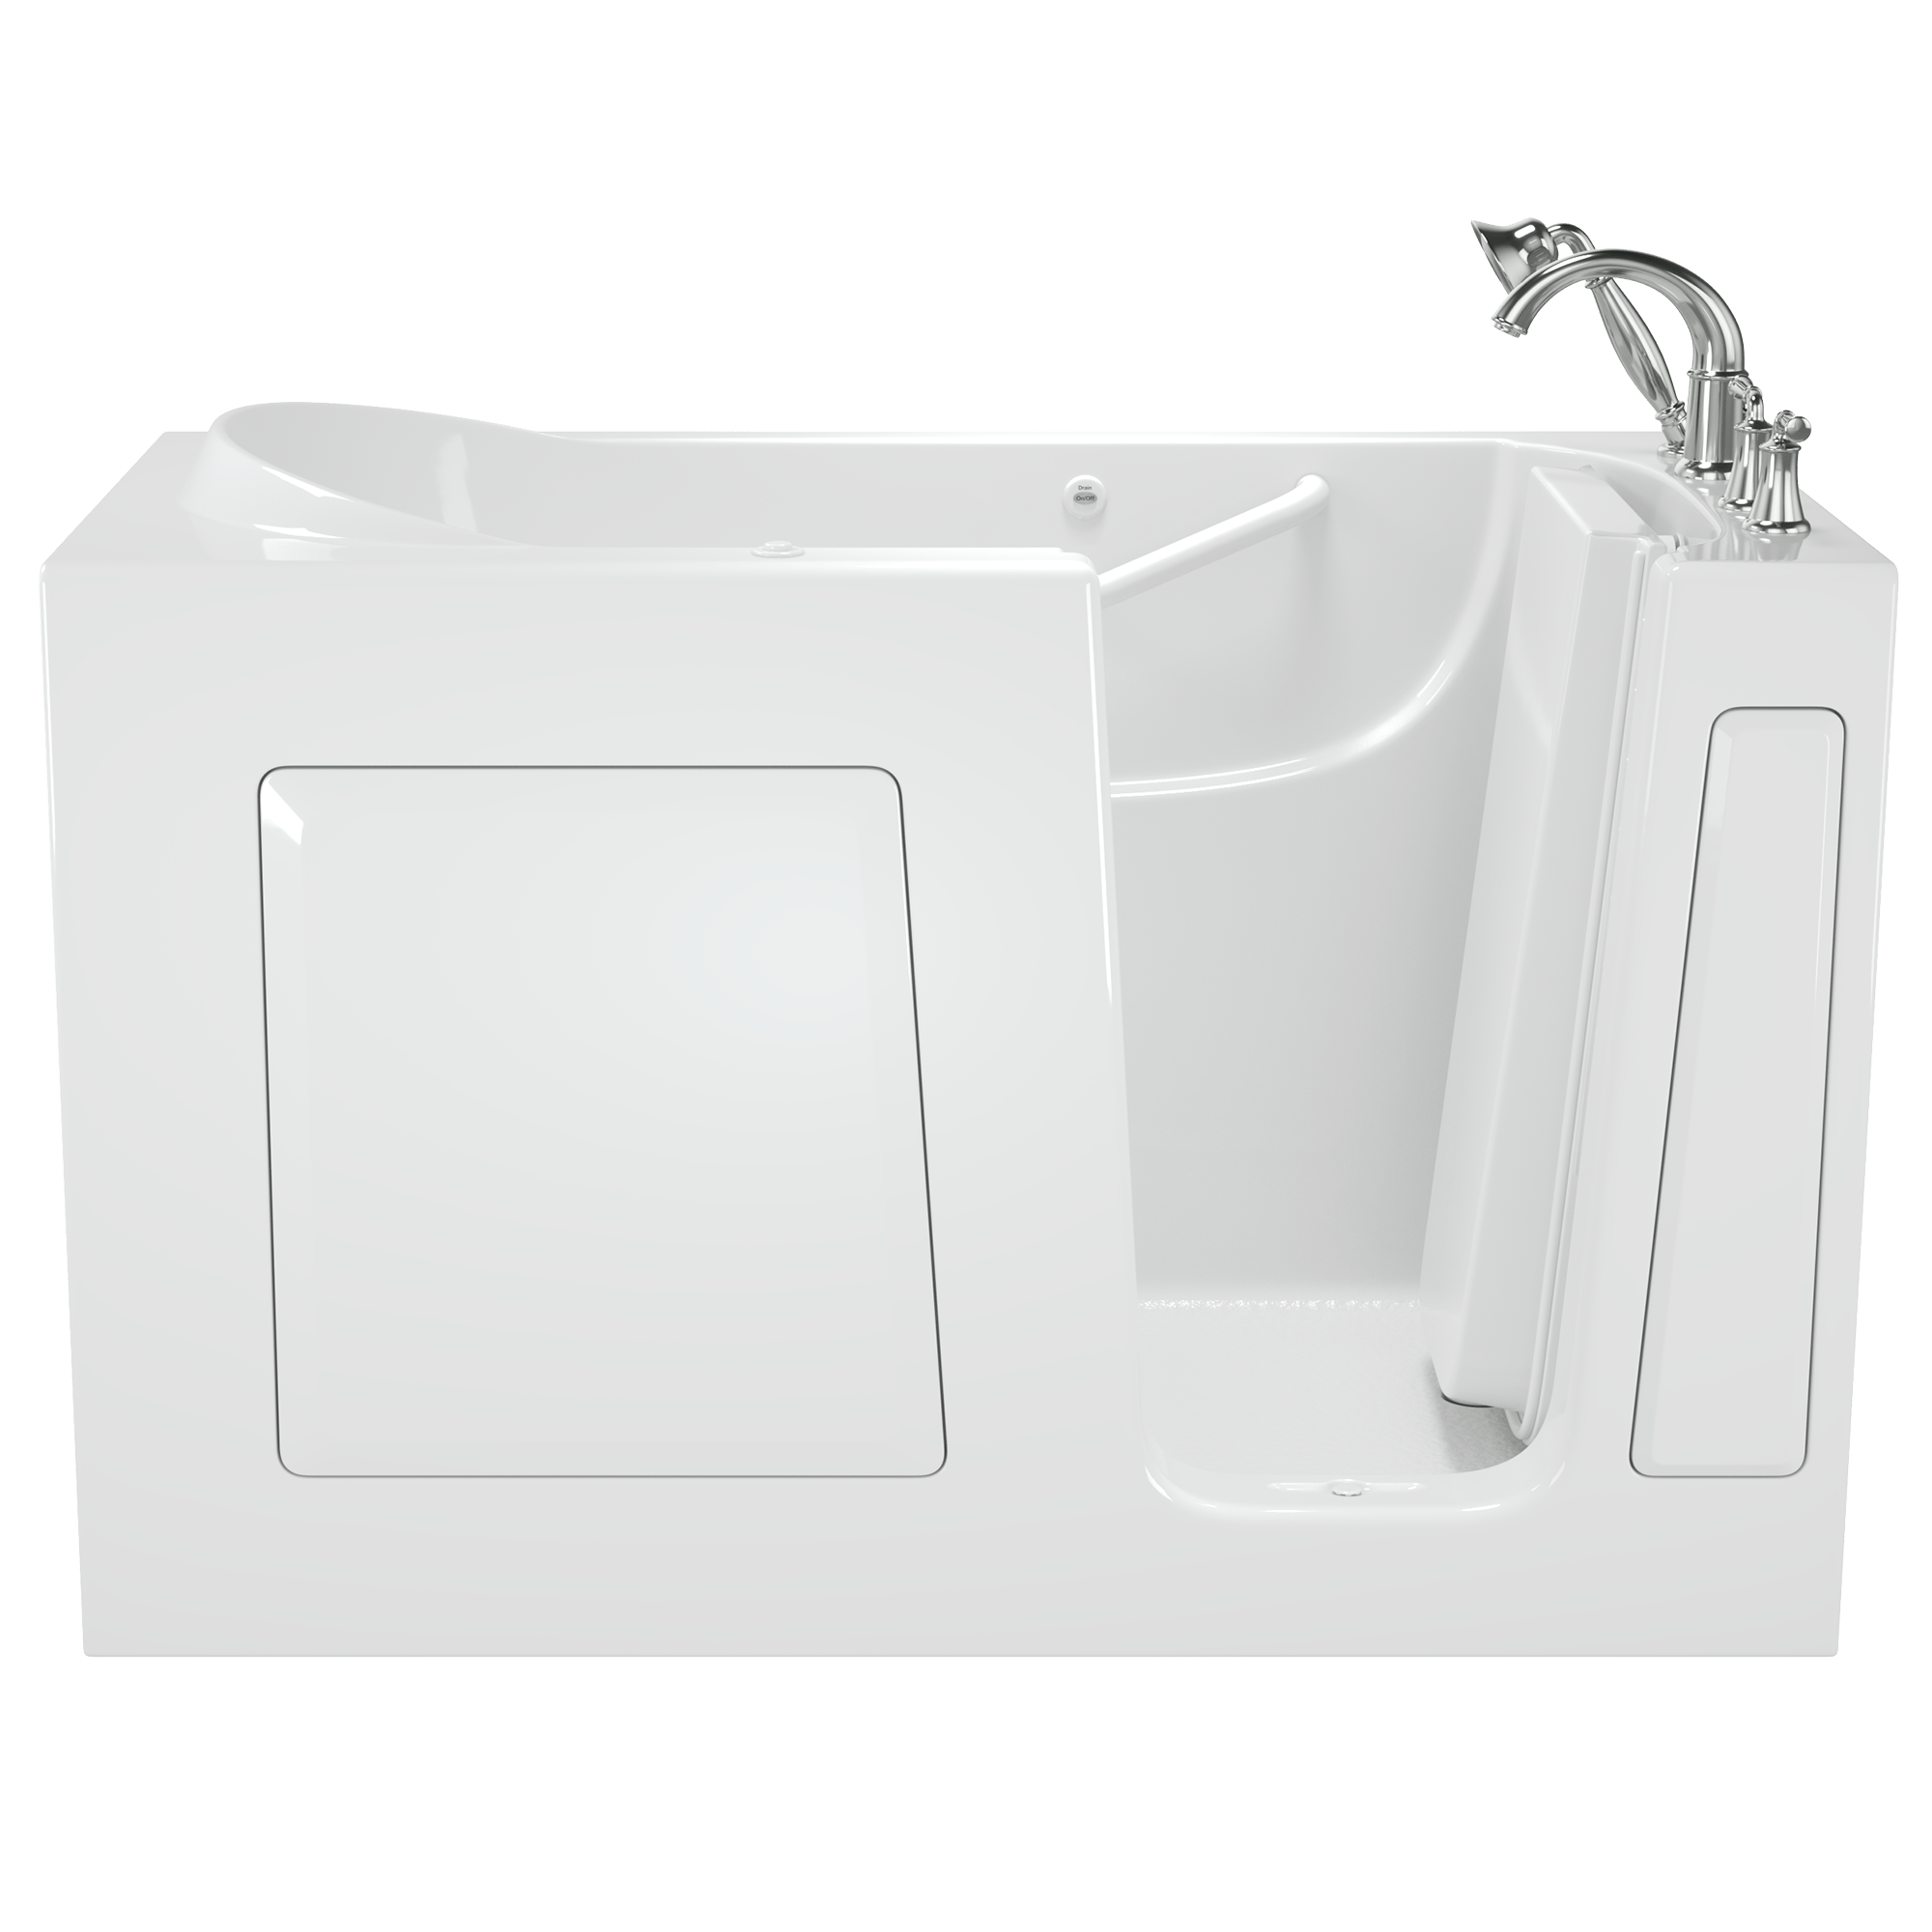 Gelcoat Value Series 30 x 60  Inch Walk in Tub With Air Spa System   Right Hand Drain With Faucet WIB WHITE